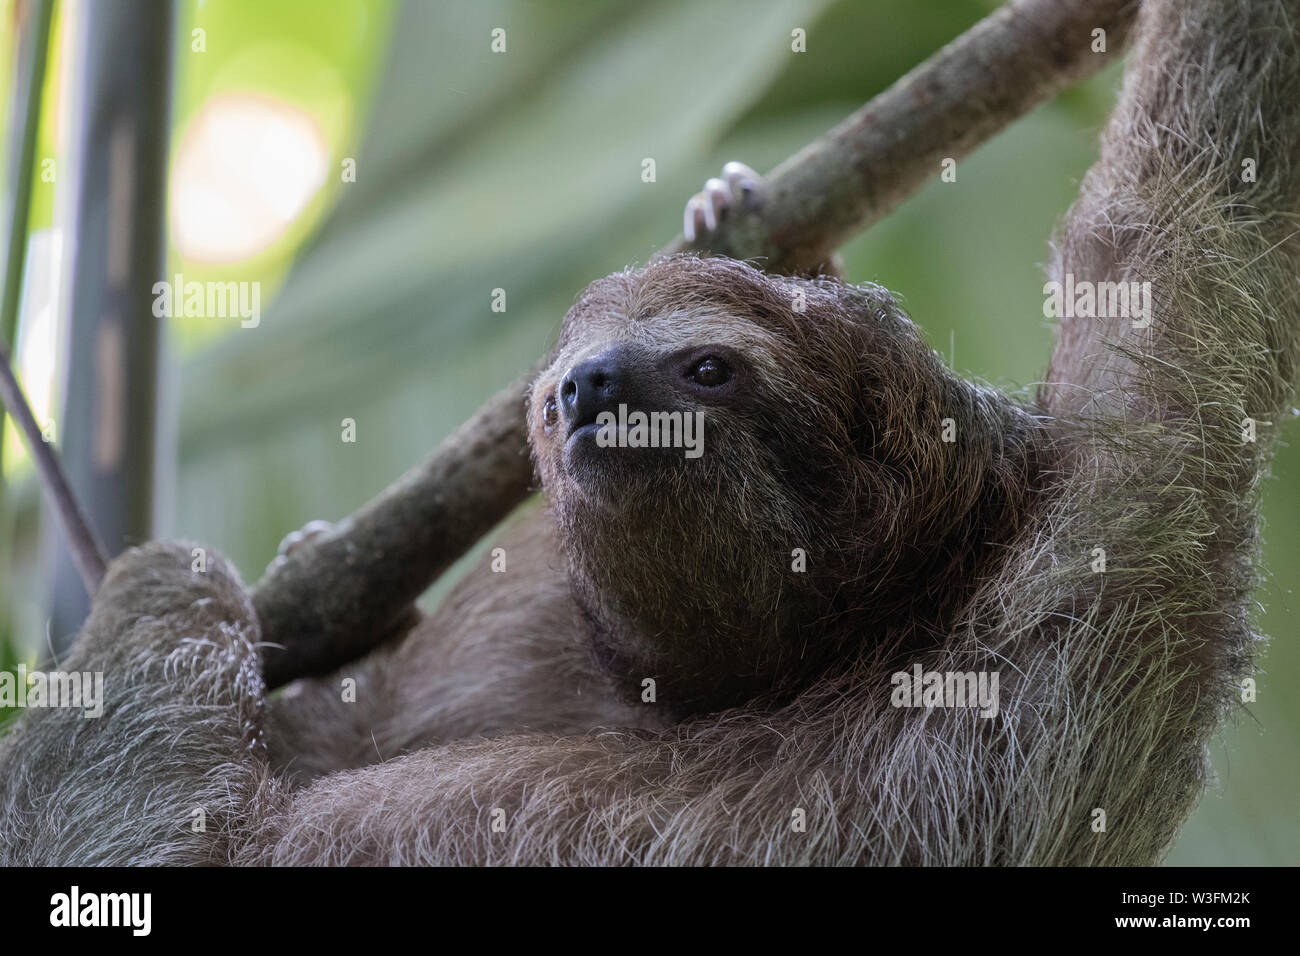 Brown-Throated trois orteils, Sloth Banque D'Images